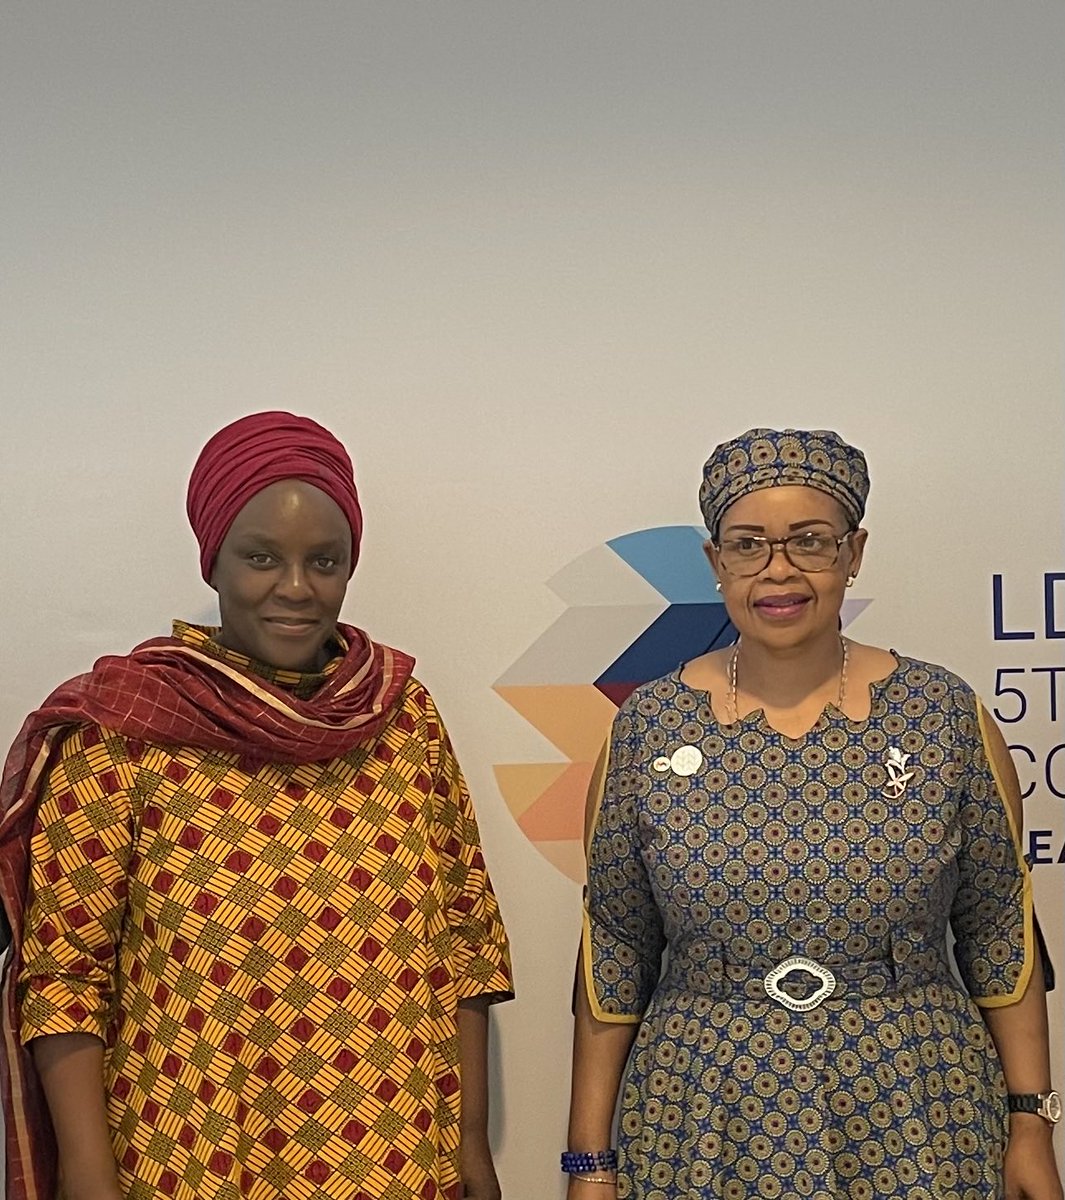 A special thank you to the Deputy Prime Minister of Lesotho Mme Majara for her leadership in Doha at the LDC5 meetings.